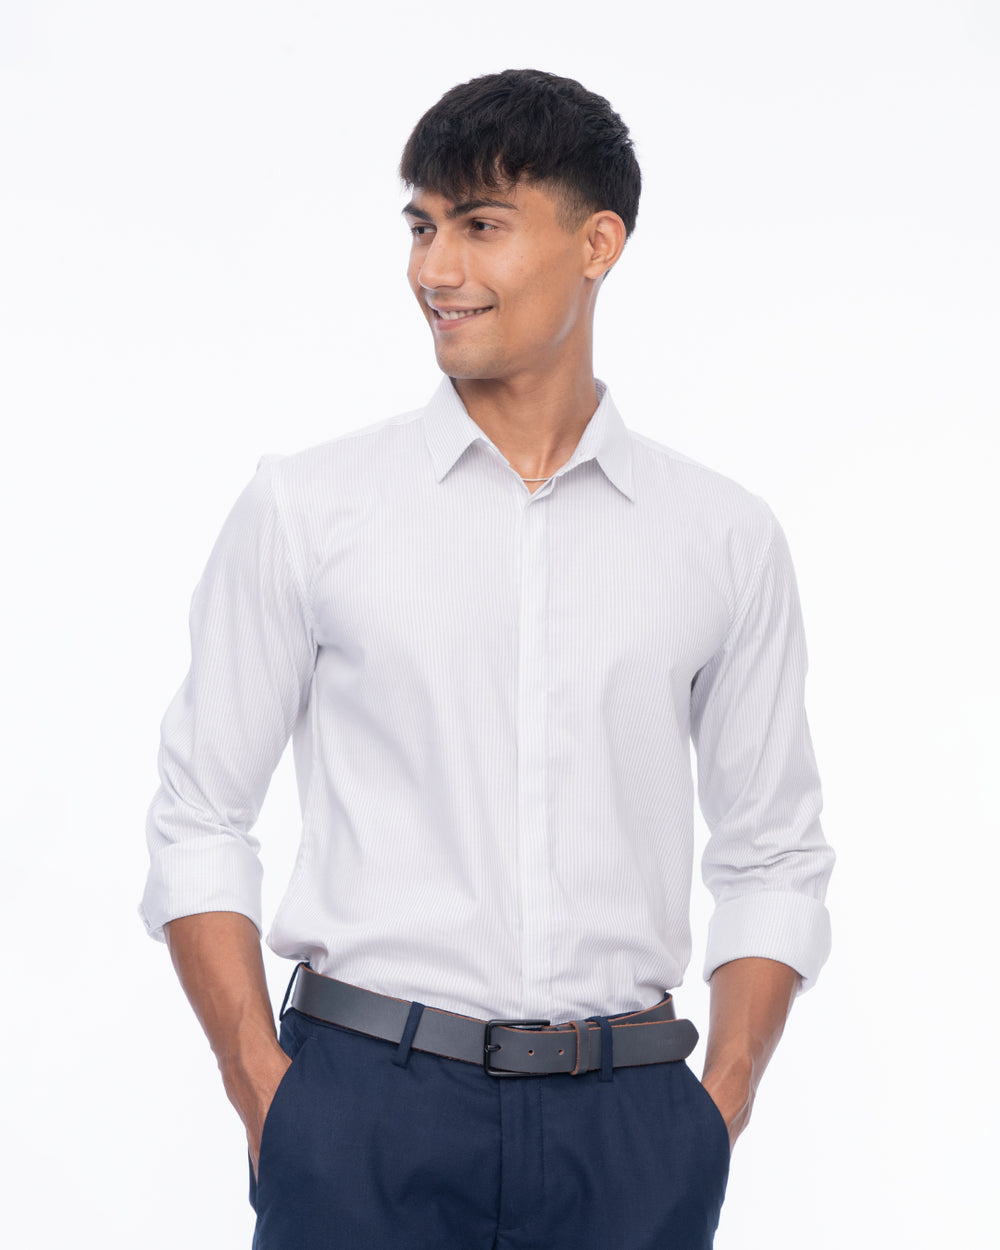 A young man stands against a plain white background, smiling and wearing a Sky Line - Classic Shirt made from premium cotton paired with dark pants. His hands are relaxed and resting in his pockets.